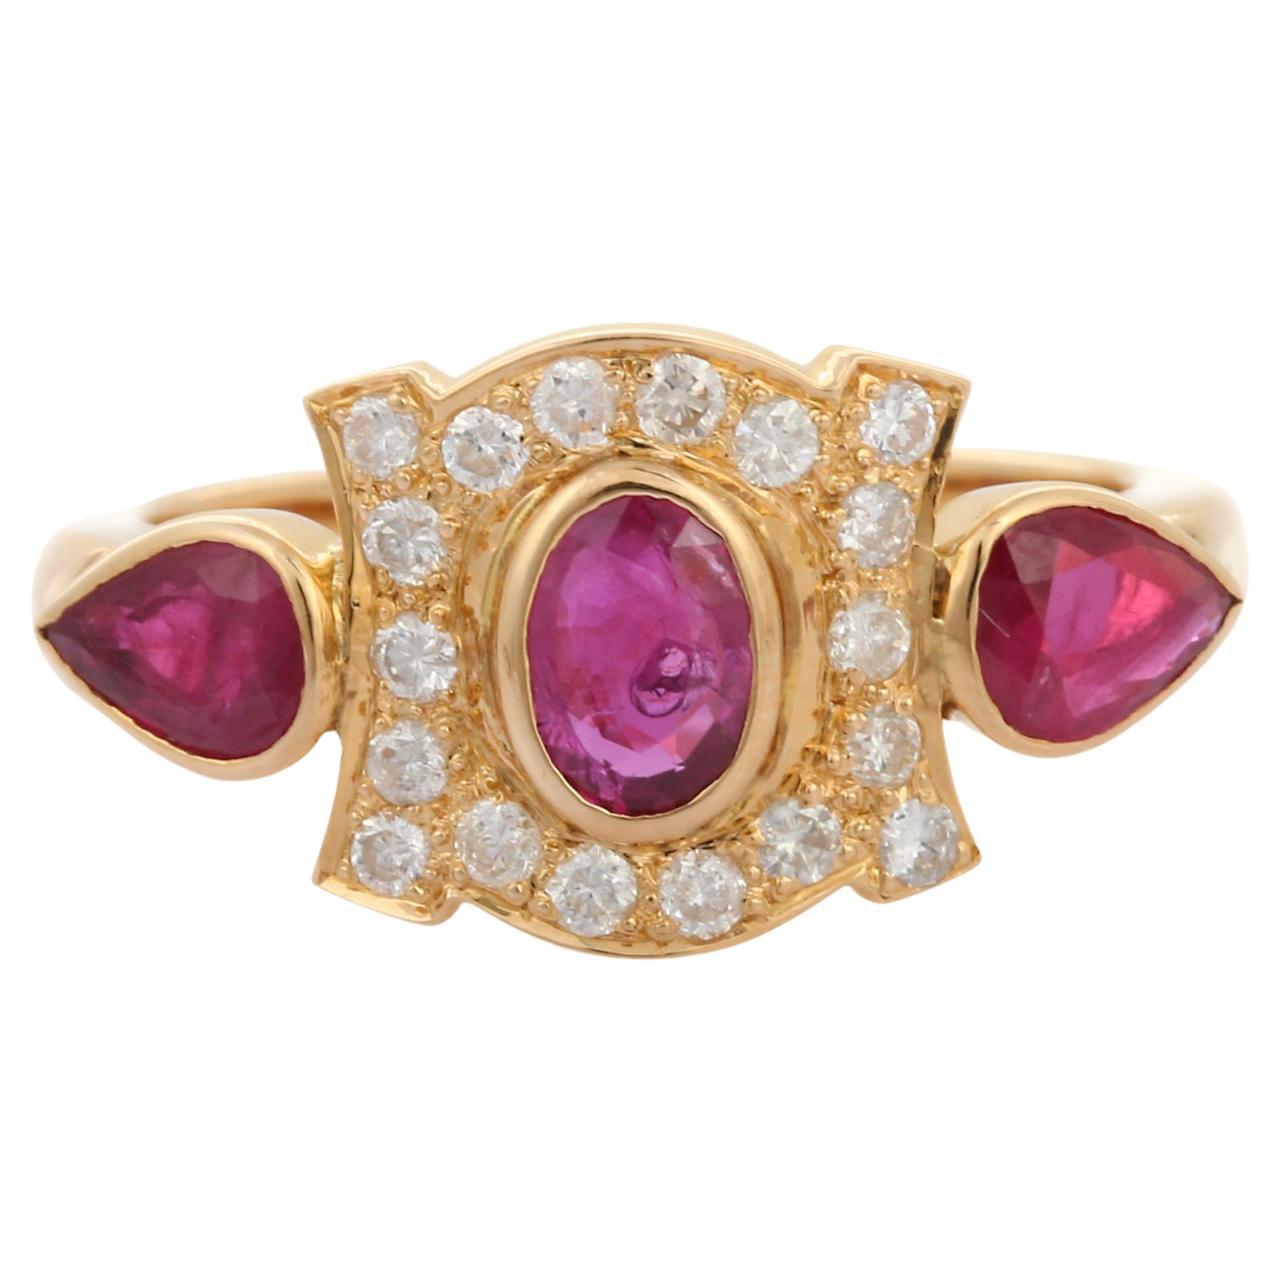 For Sale:  18K Yellow Gold Ruby Three Stone Ring with Diamonds Wedding Gemstone Ring